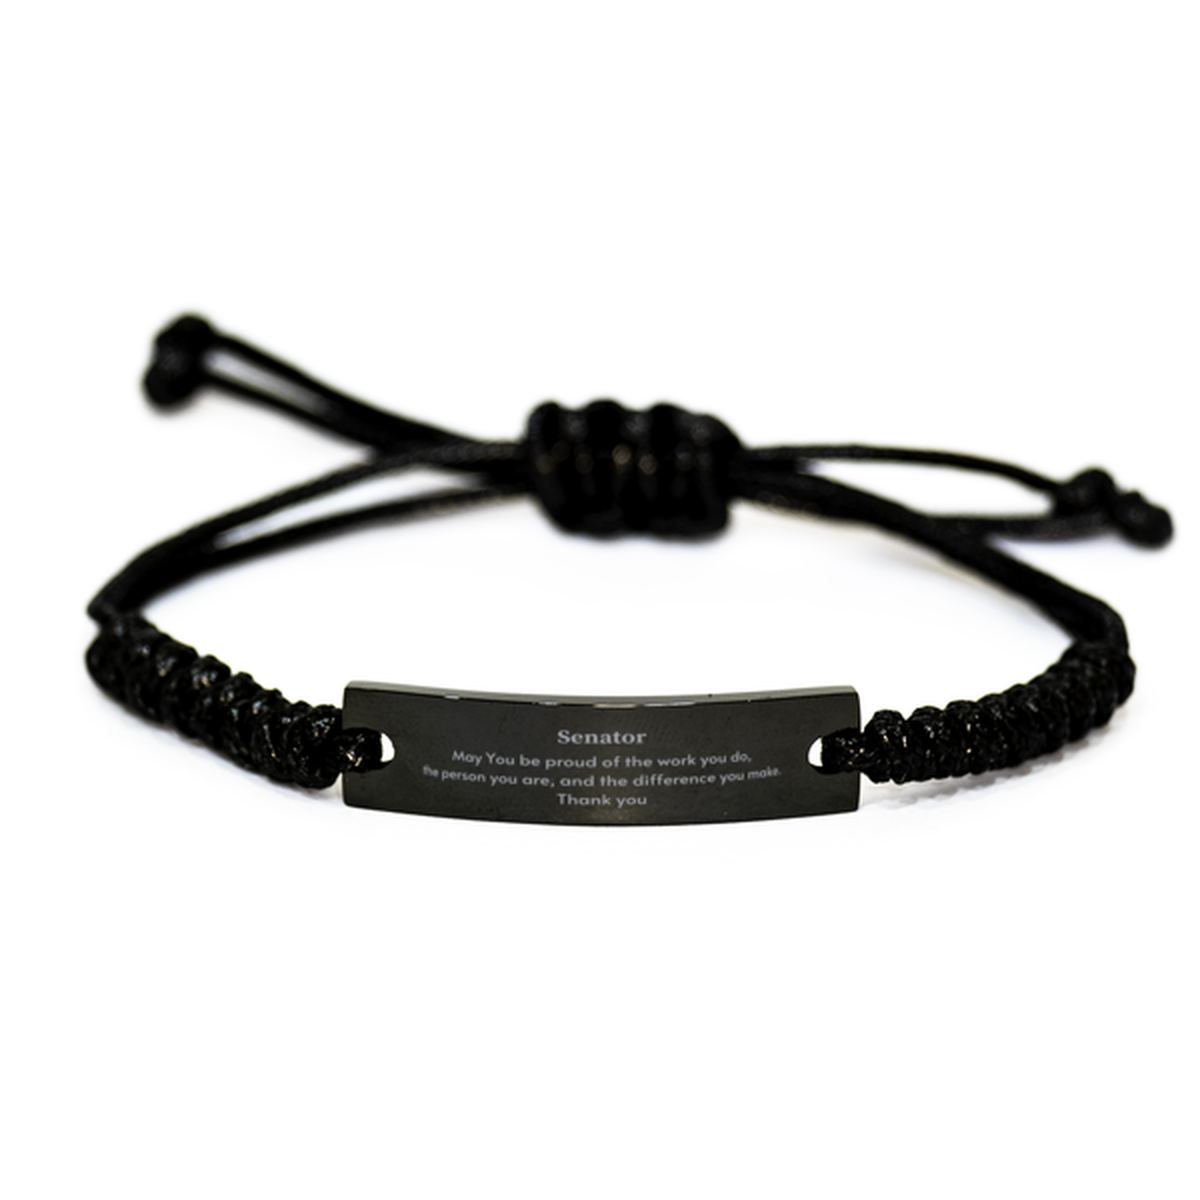 Heartwarming Black Rope Bracelet Retirement Coworkers Gifts for Senator, Senator May You be proud of the work you do, the person you are Gifts for Boss Men Women Friends